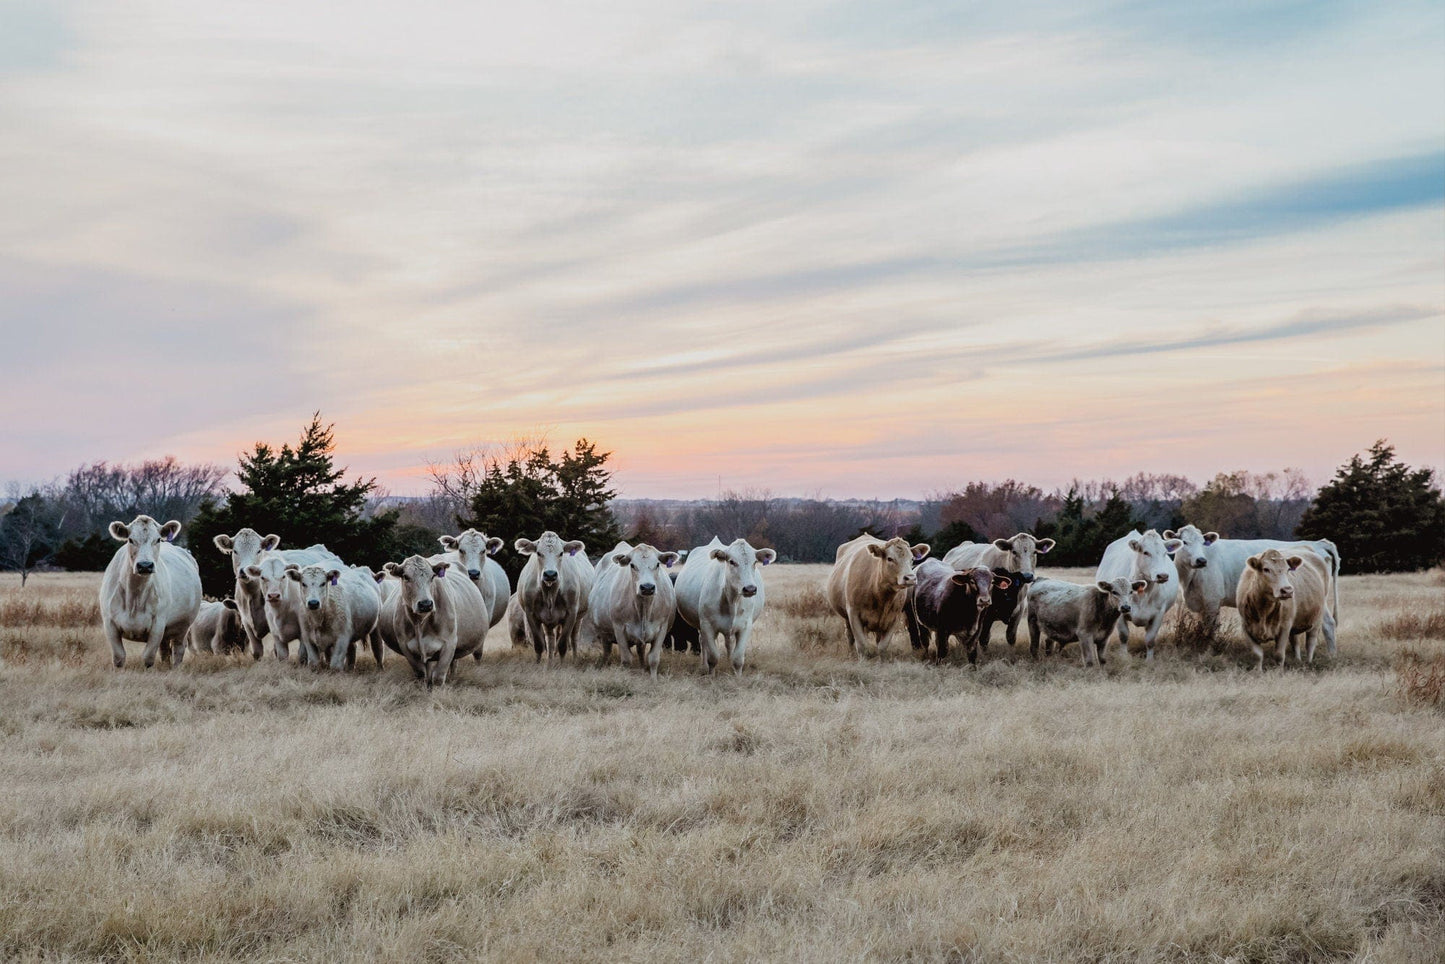 Teri James Photography Wall Art Paper Photo Print / 12 x 18 Inches Charolais Cattle Canvas - Charolais Cows at Sunset